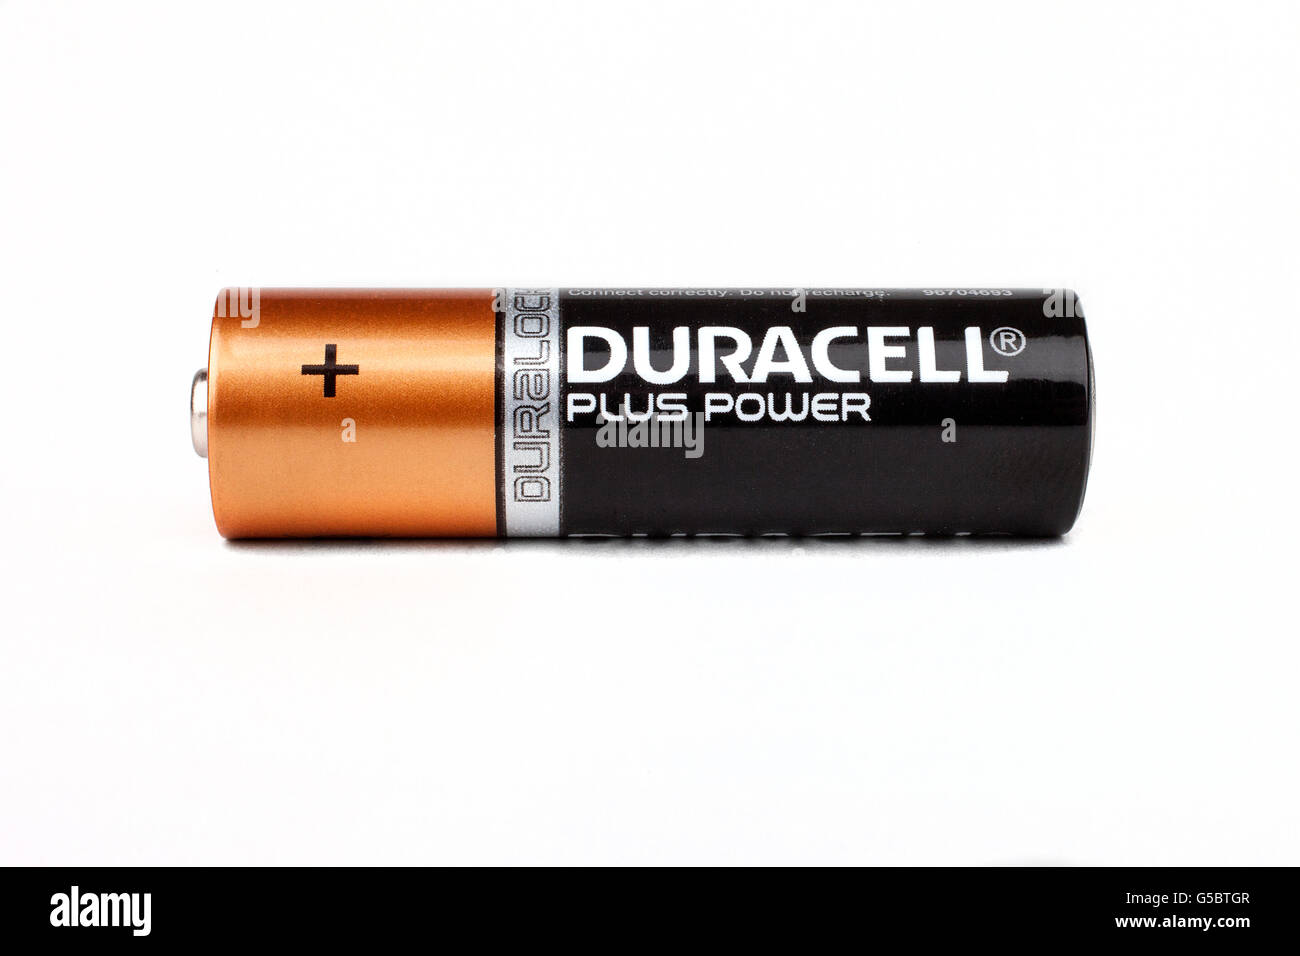 Battery Products High Resolution Stock Photography and Images - Alamy